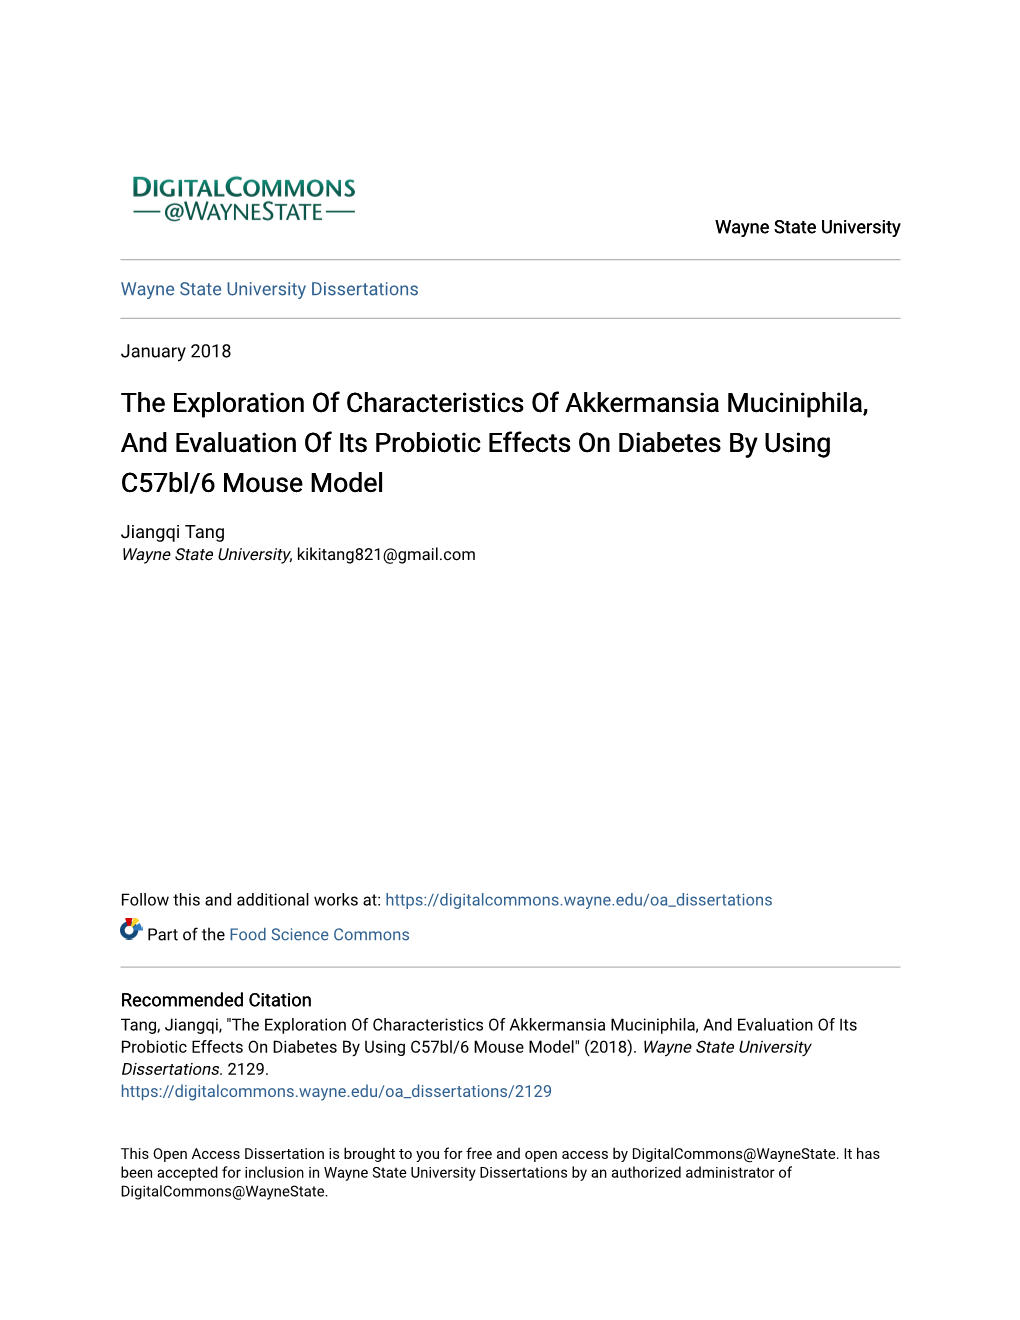 The Exploration of Characteristics of Akkermansia Muciniphila, and Evaluation of Its Probiotic Effects on Diabetes by Using C57bl/6 Mouse Model